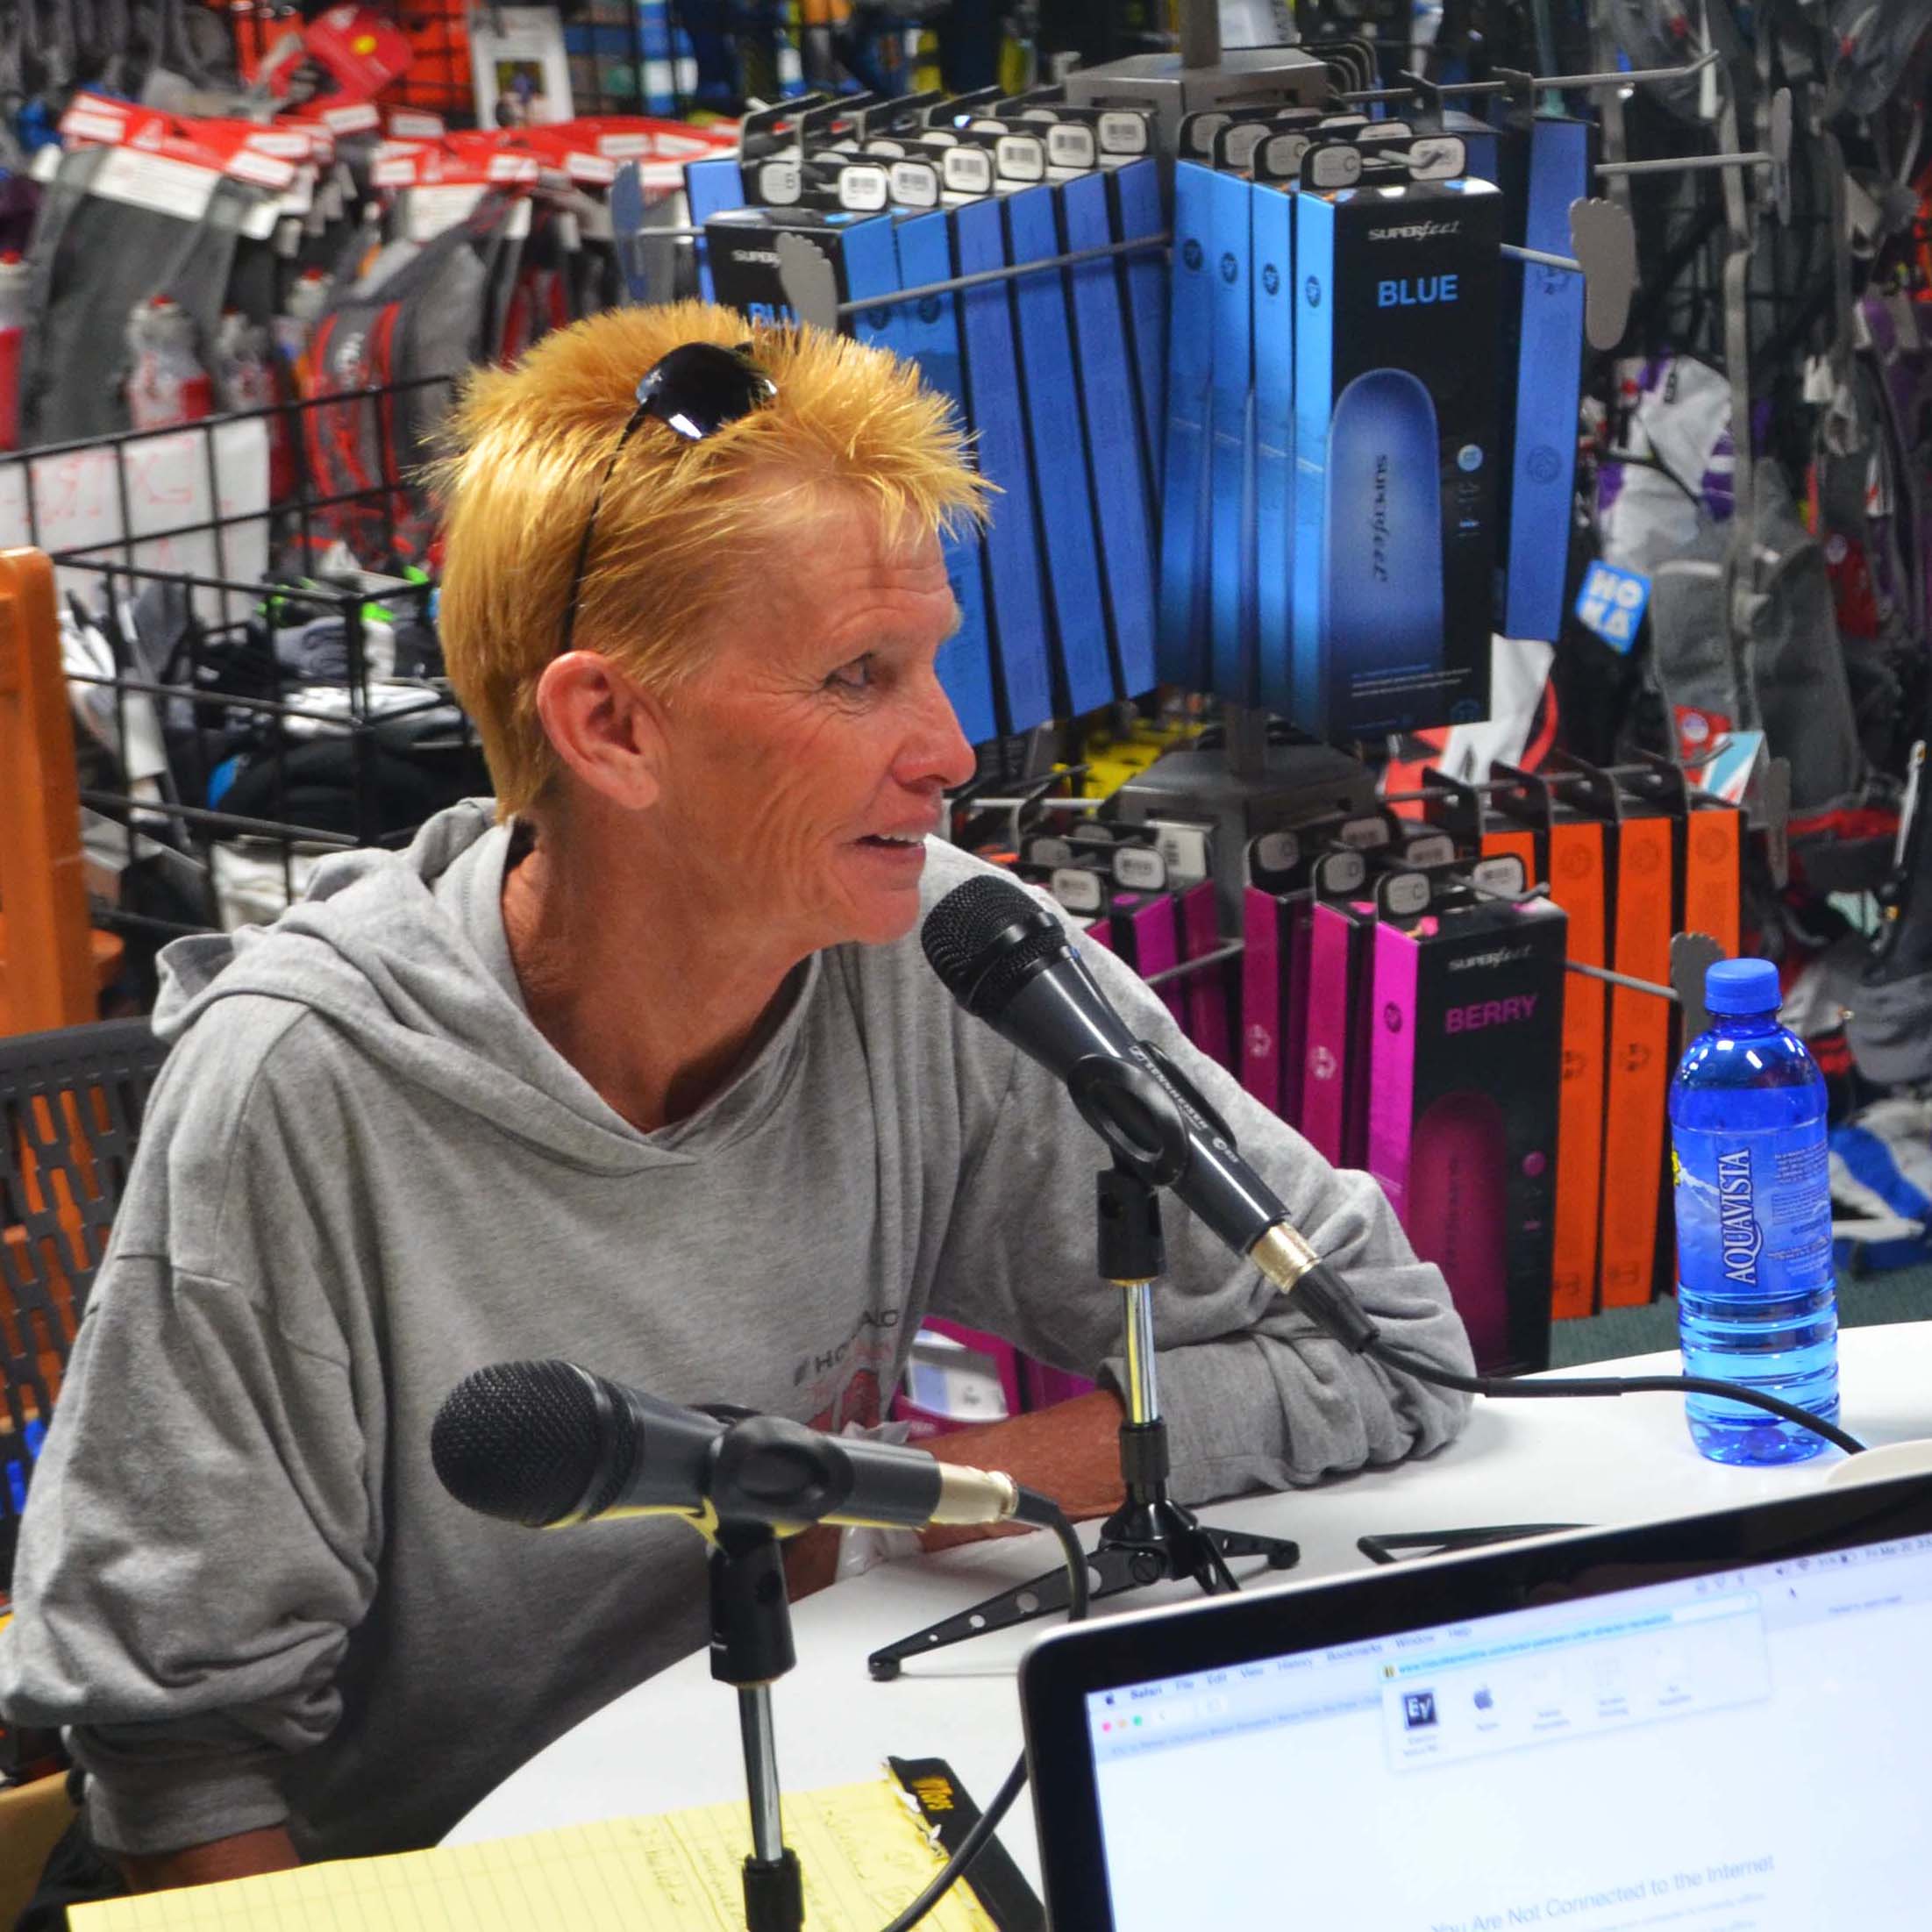 Pam Reed - Ultra Running Legend and Race Director